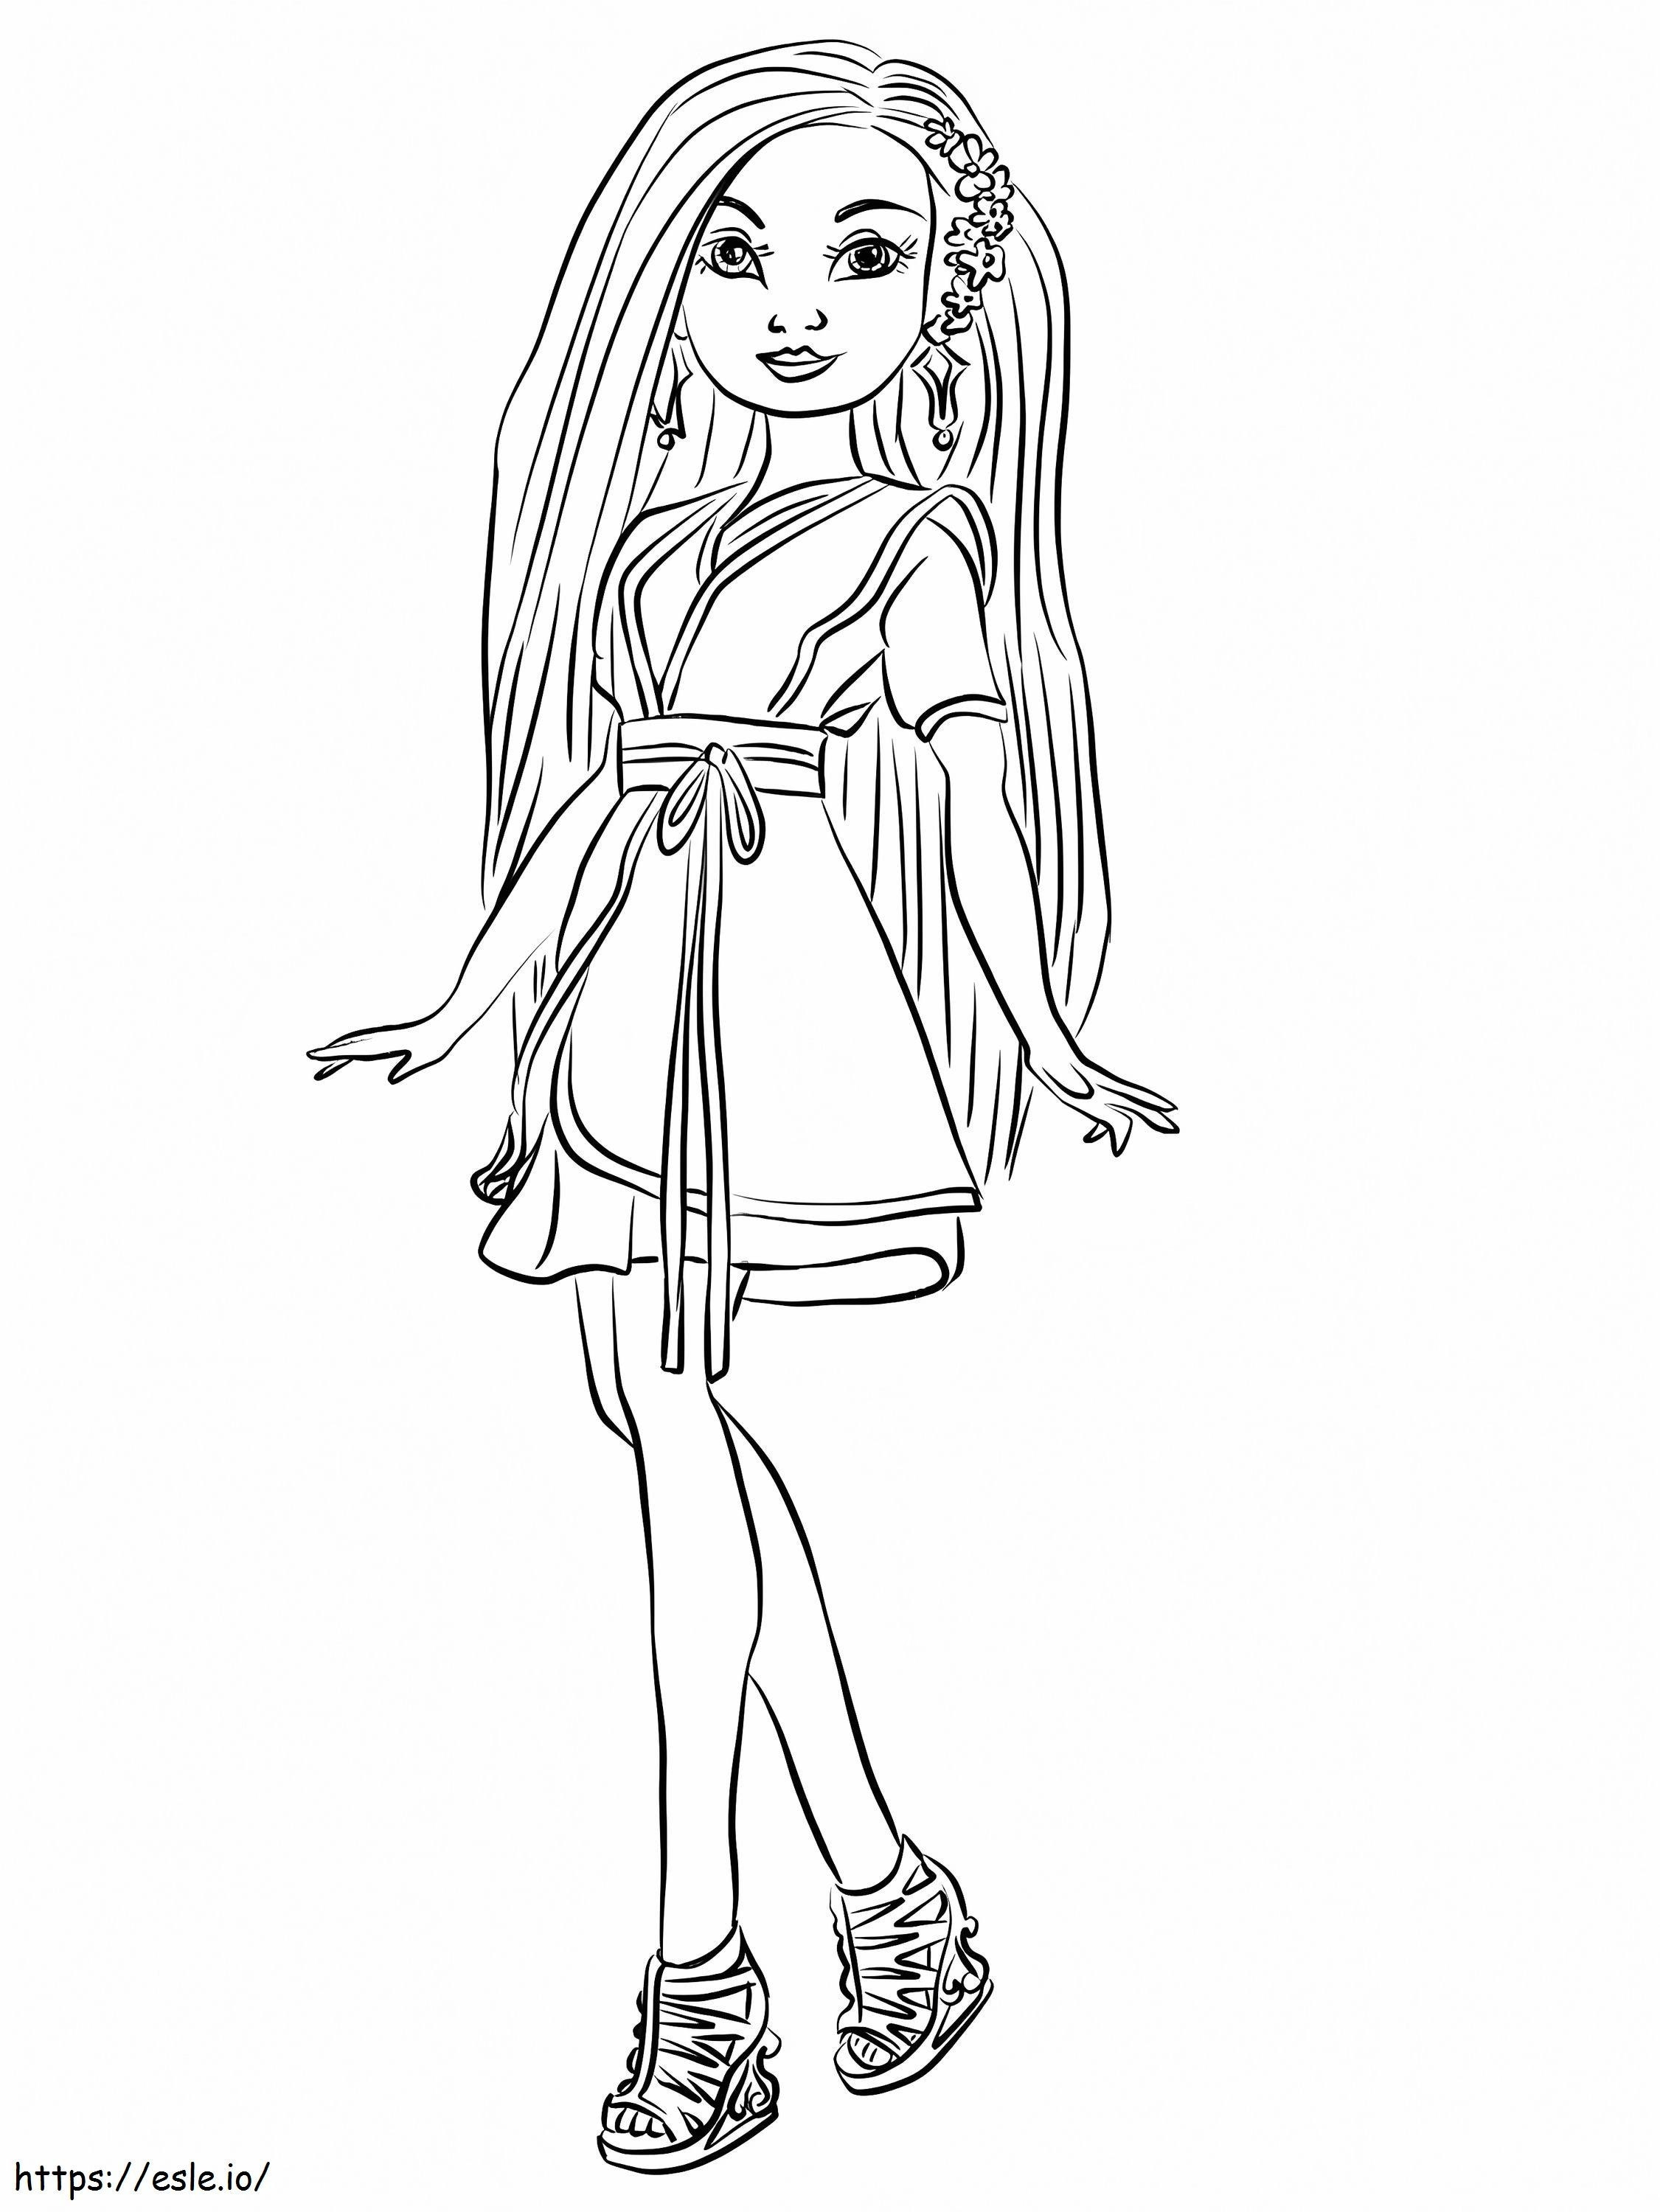 1584155494 Lonnie From Descendants Wicked World coloring page